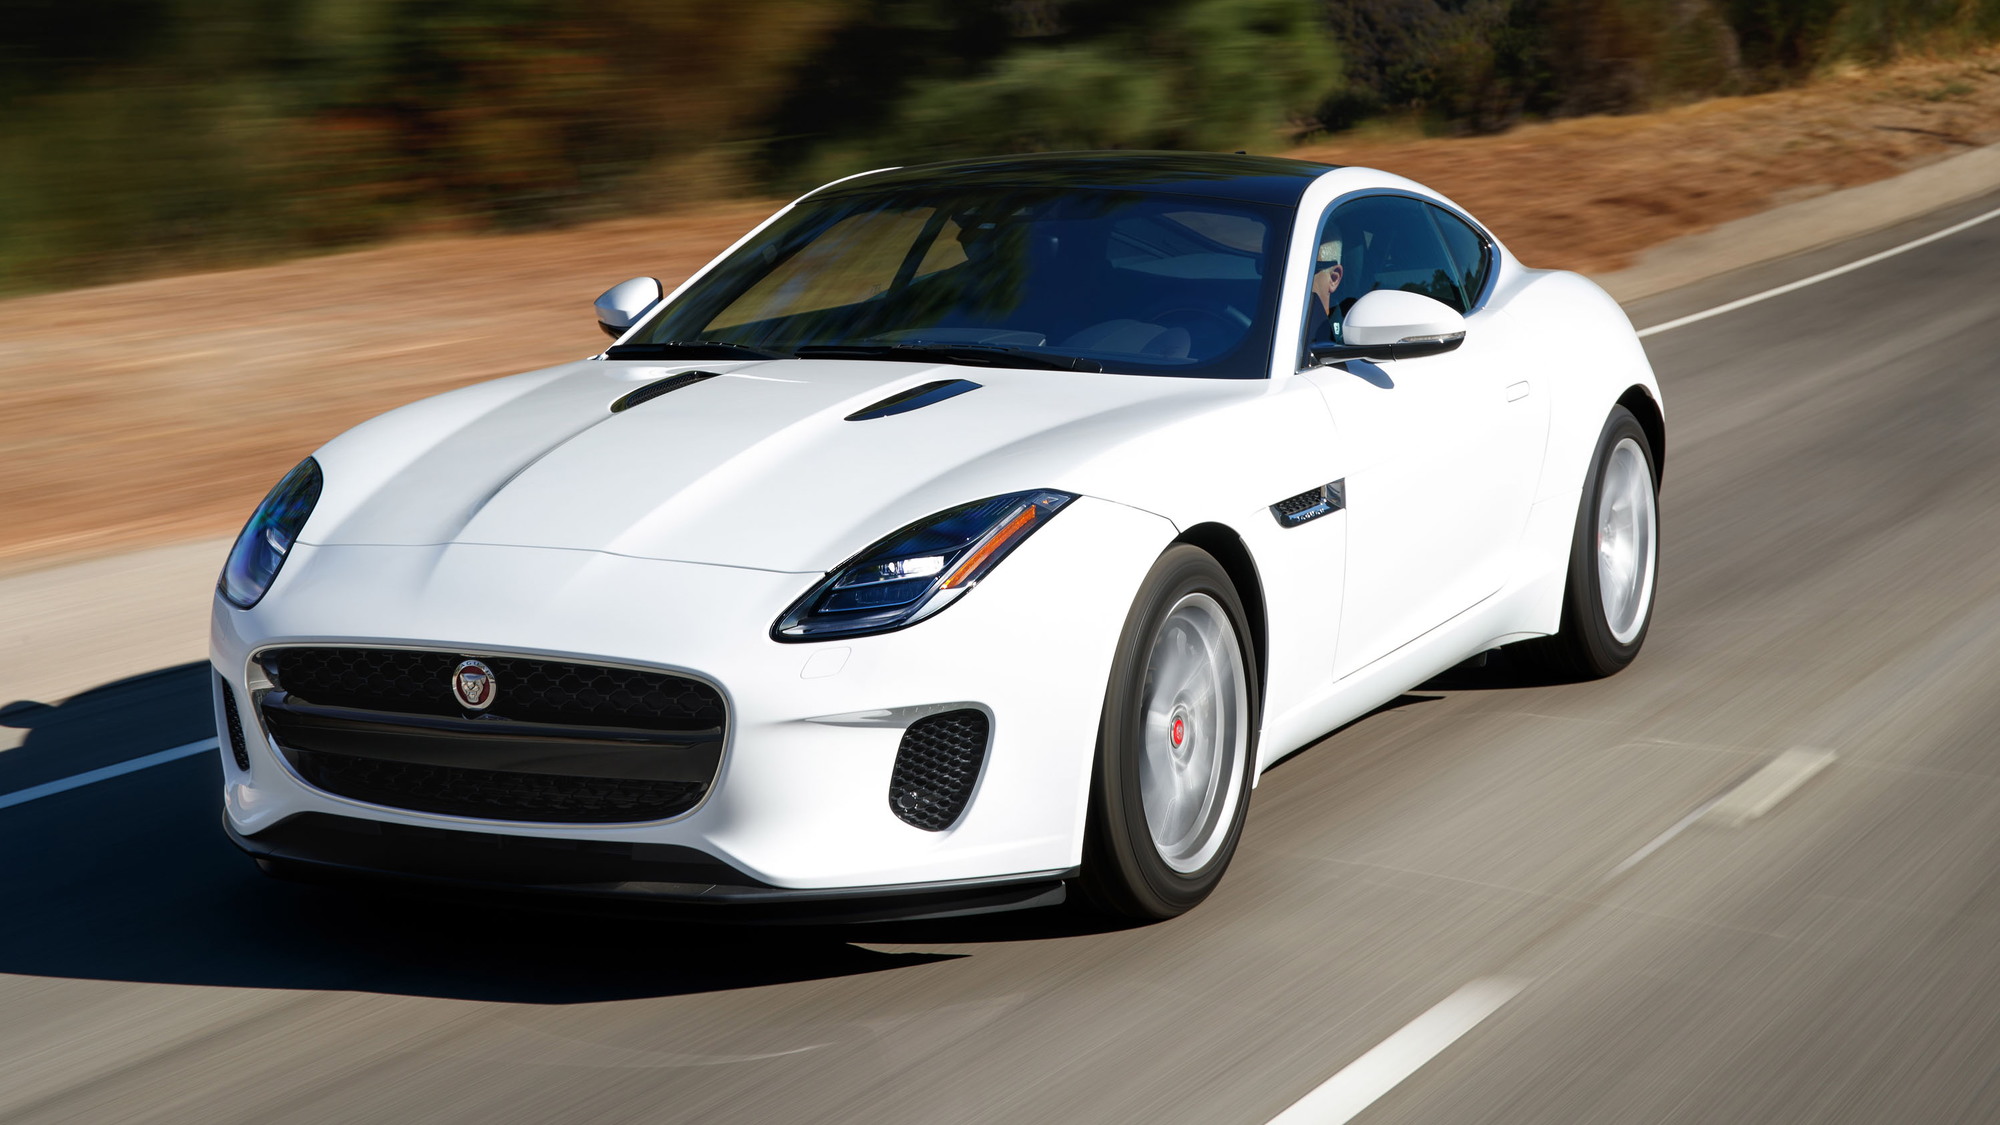 2018 Jaguar F-Type first drive review: fulfilling the mission